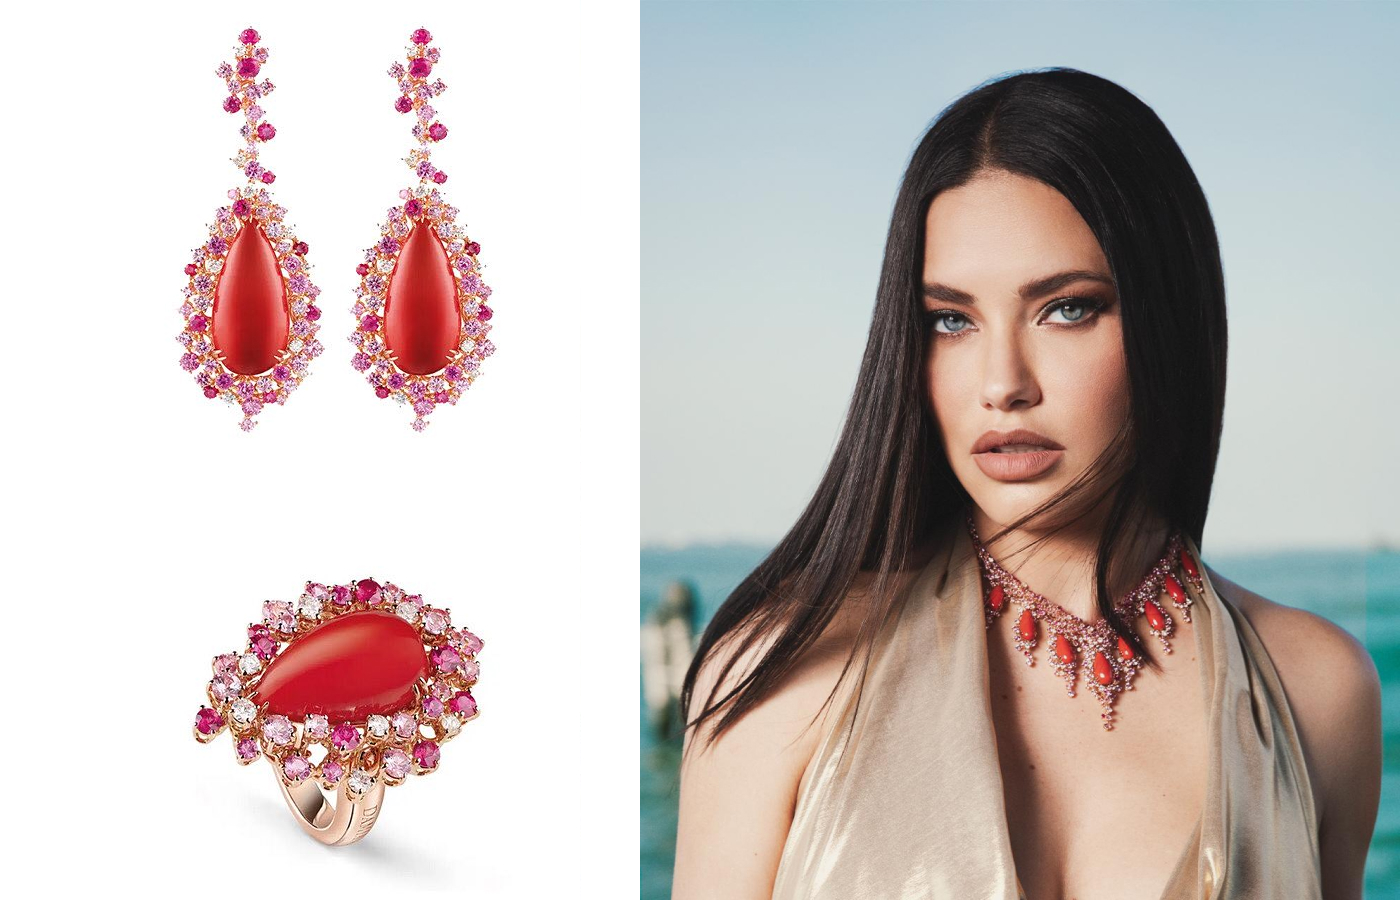 Adriana Lima attends the Venice Film Festival wearing a suite of Damiani jewels in pink gold, with diamonds, rubies, pink sapphires and Mediterranean coral from the brand’s Mimosa collection